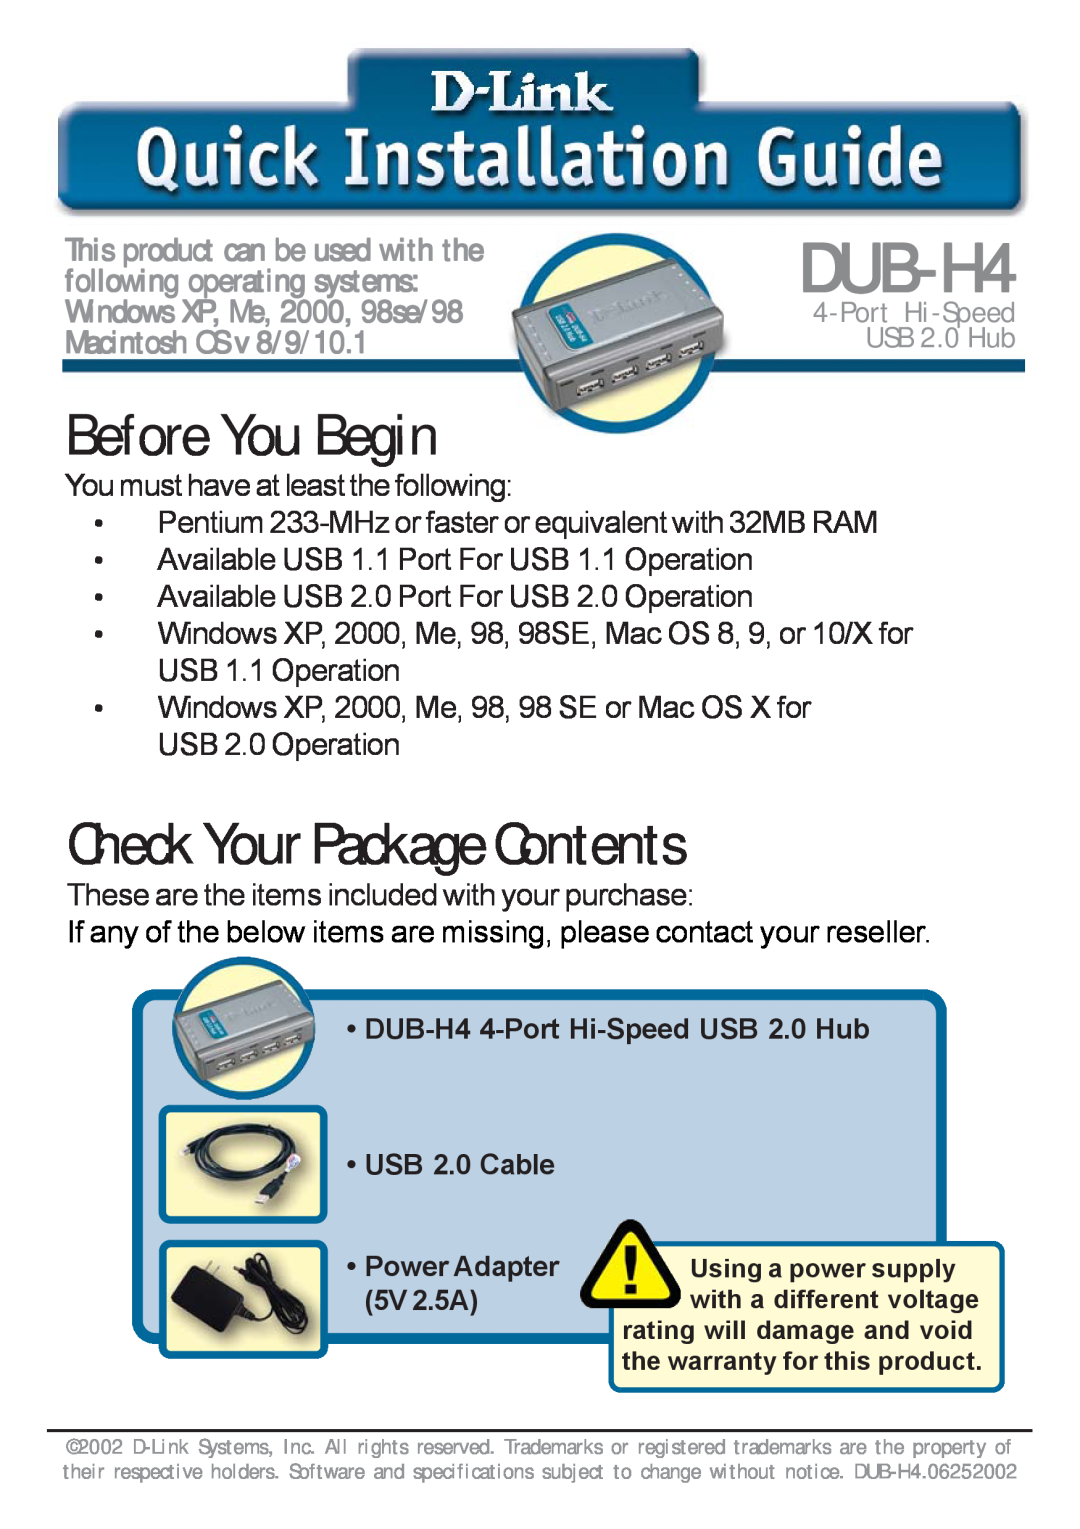 D-Link DUB-H4 warranty Before You Begin, Check Your Package Contents 